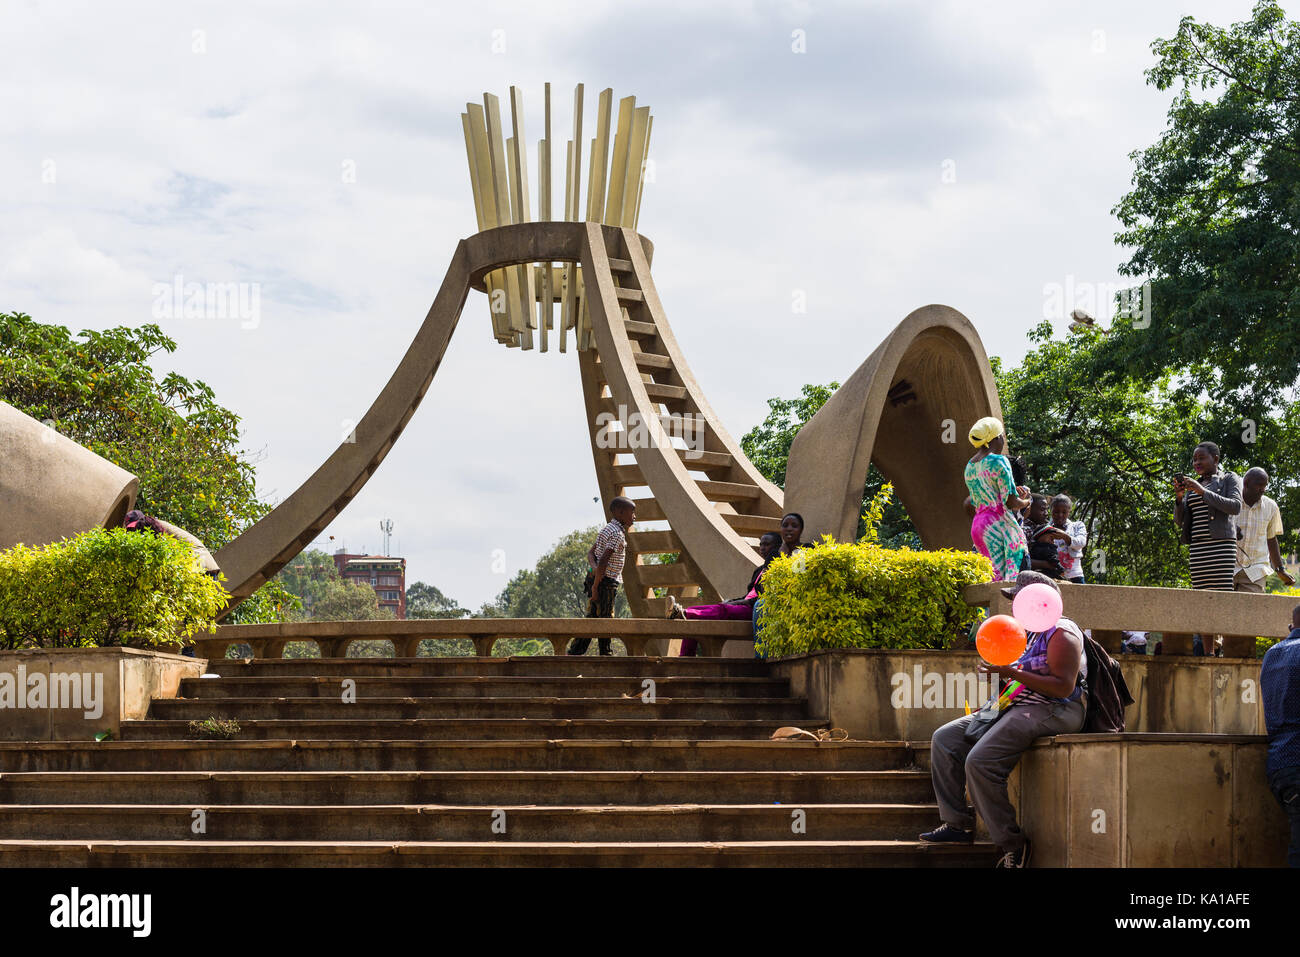 Water fountain monument built during President Moi's rule in the 1980s depicting love, peace and unity, Uhuru Park, Nairobi, Kenya, East Africa Stock Photo